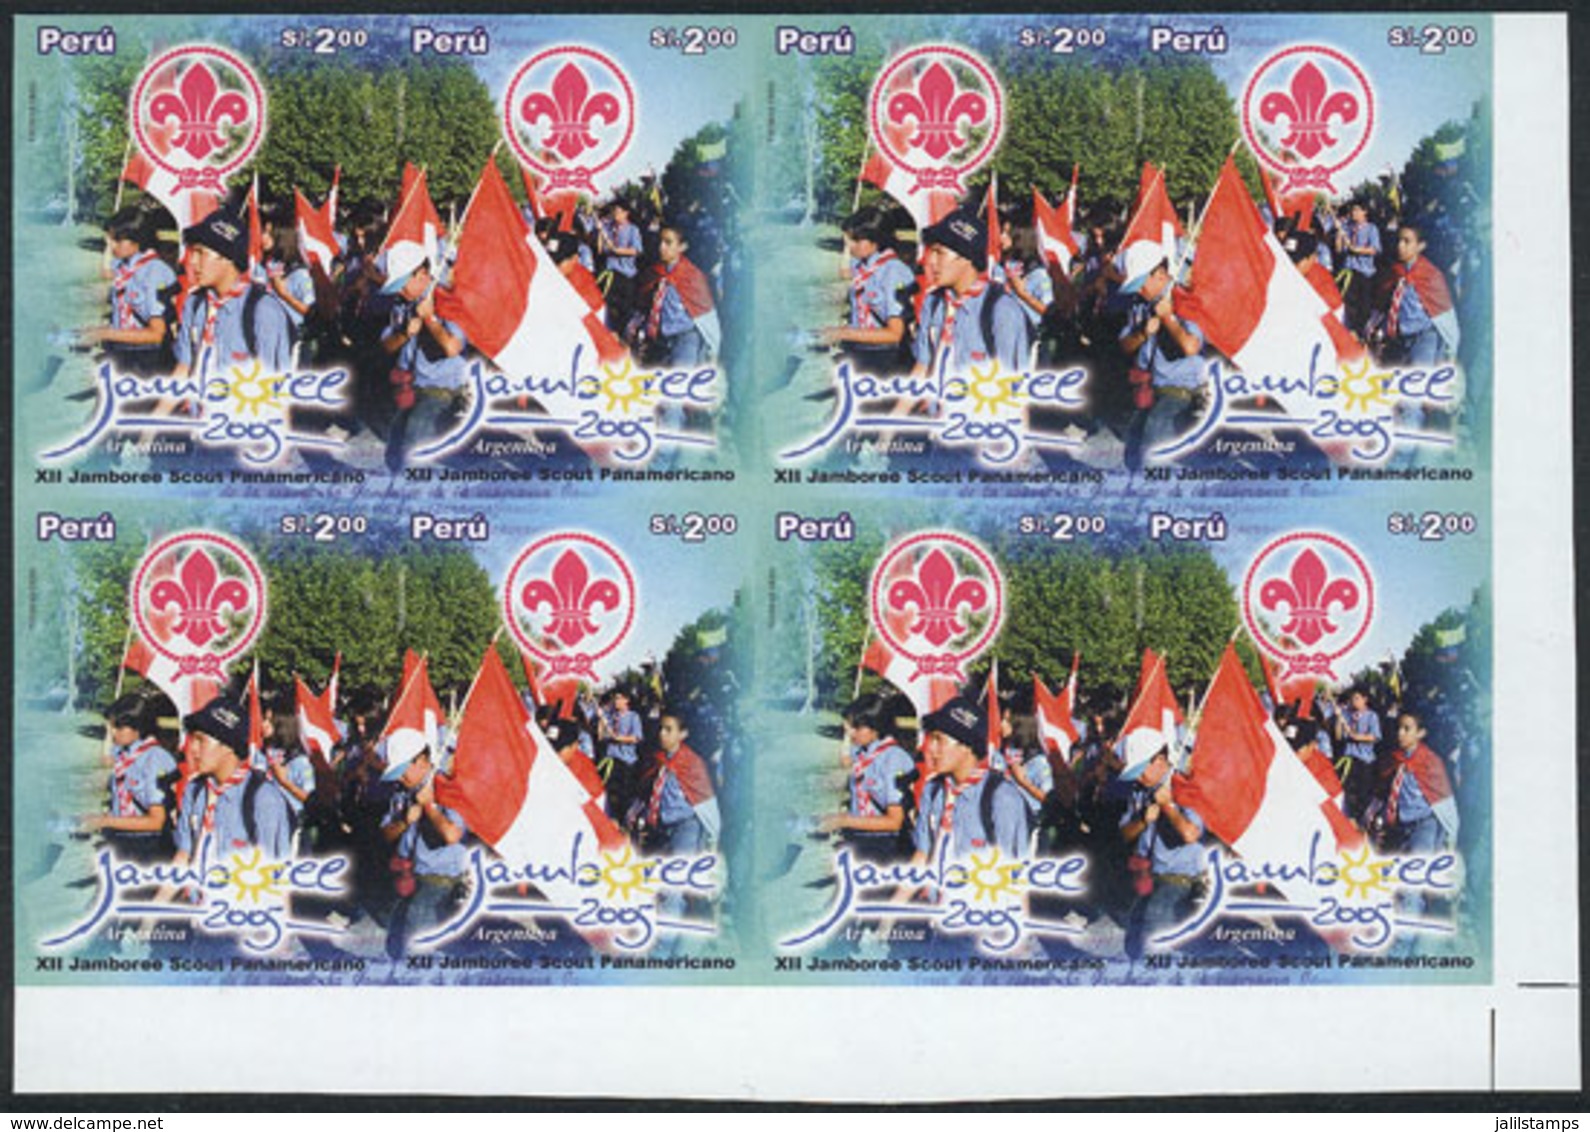 PERU: Sc.1502, 2006 Scouts, 12th Jamboree Of Argentina, IMPERFORATE BLOCK OF 4 Consisting Of 4 Sets, Excellent Quality,  - Perú